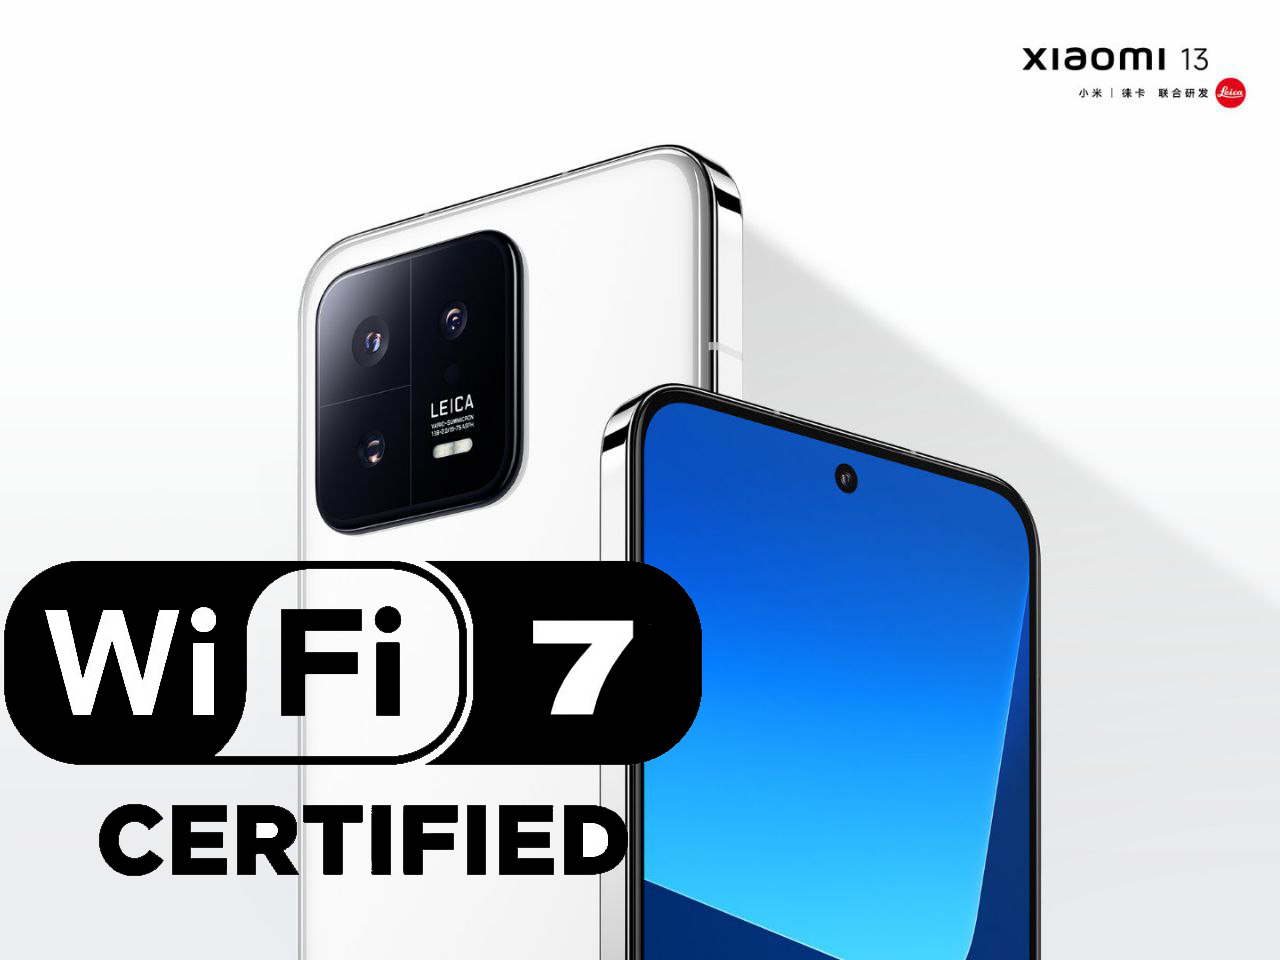 It turns out that Xiaomi 13 has Wi-Fi 7, but you can’t use this connection yet